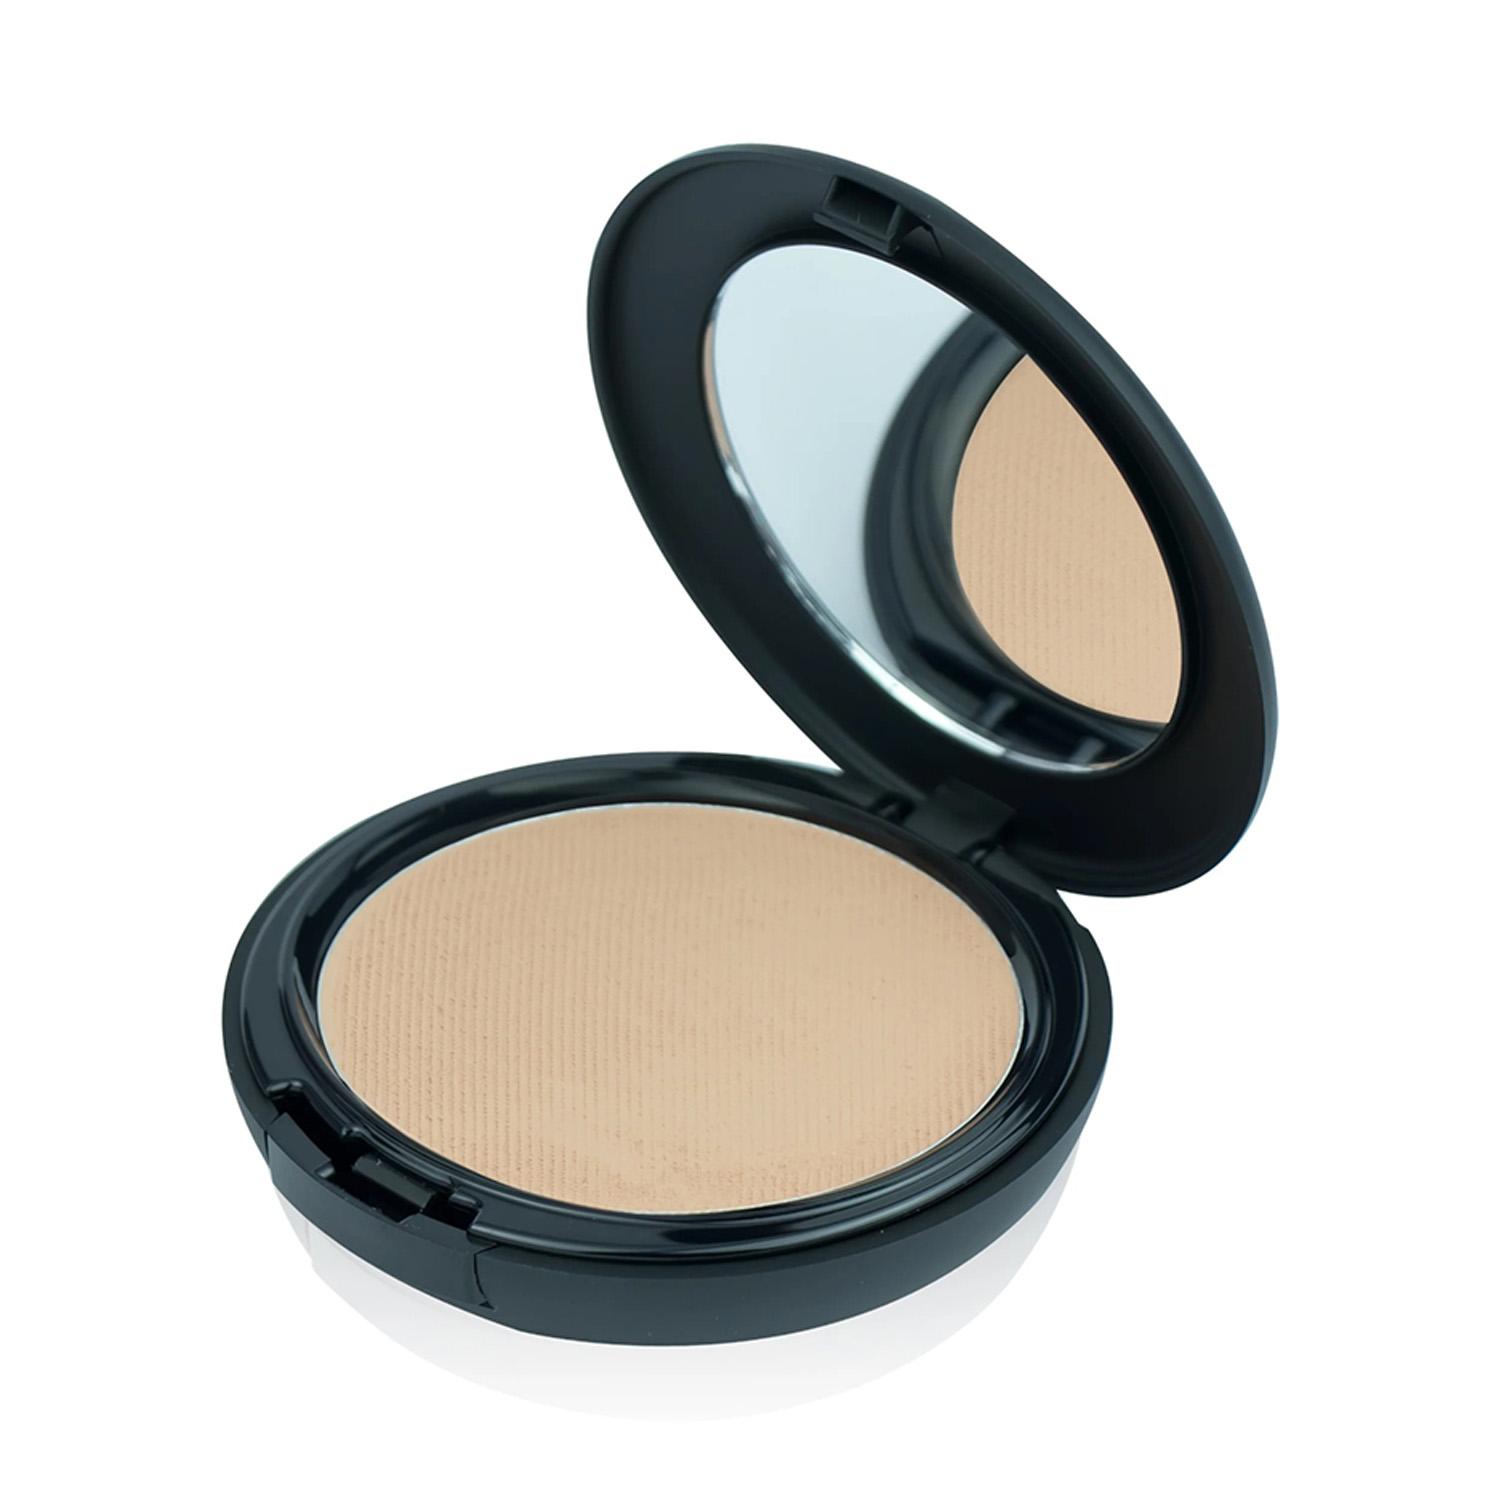 Faces Canada | Faces Canada Ultime Pro Expert Cover - Ivory, Non Oily Matte Look, Evens Out Complexion (9 g)